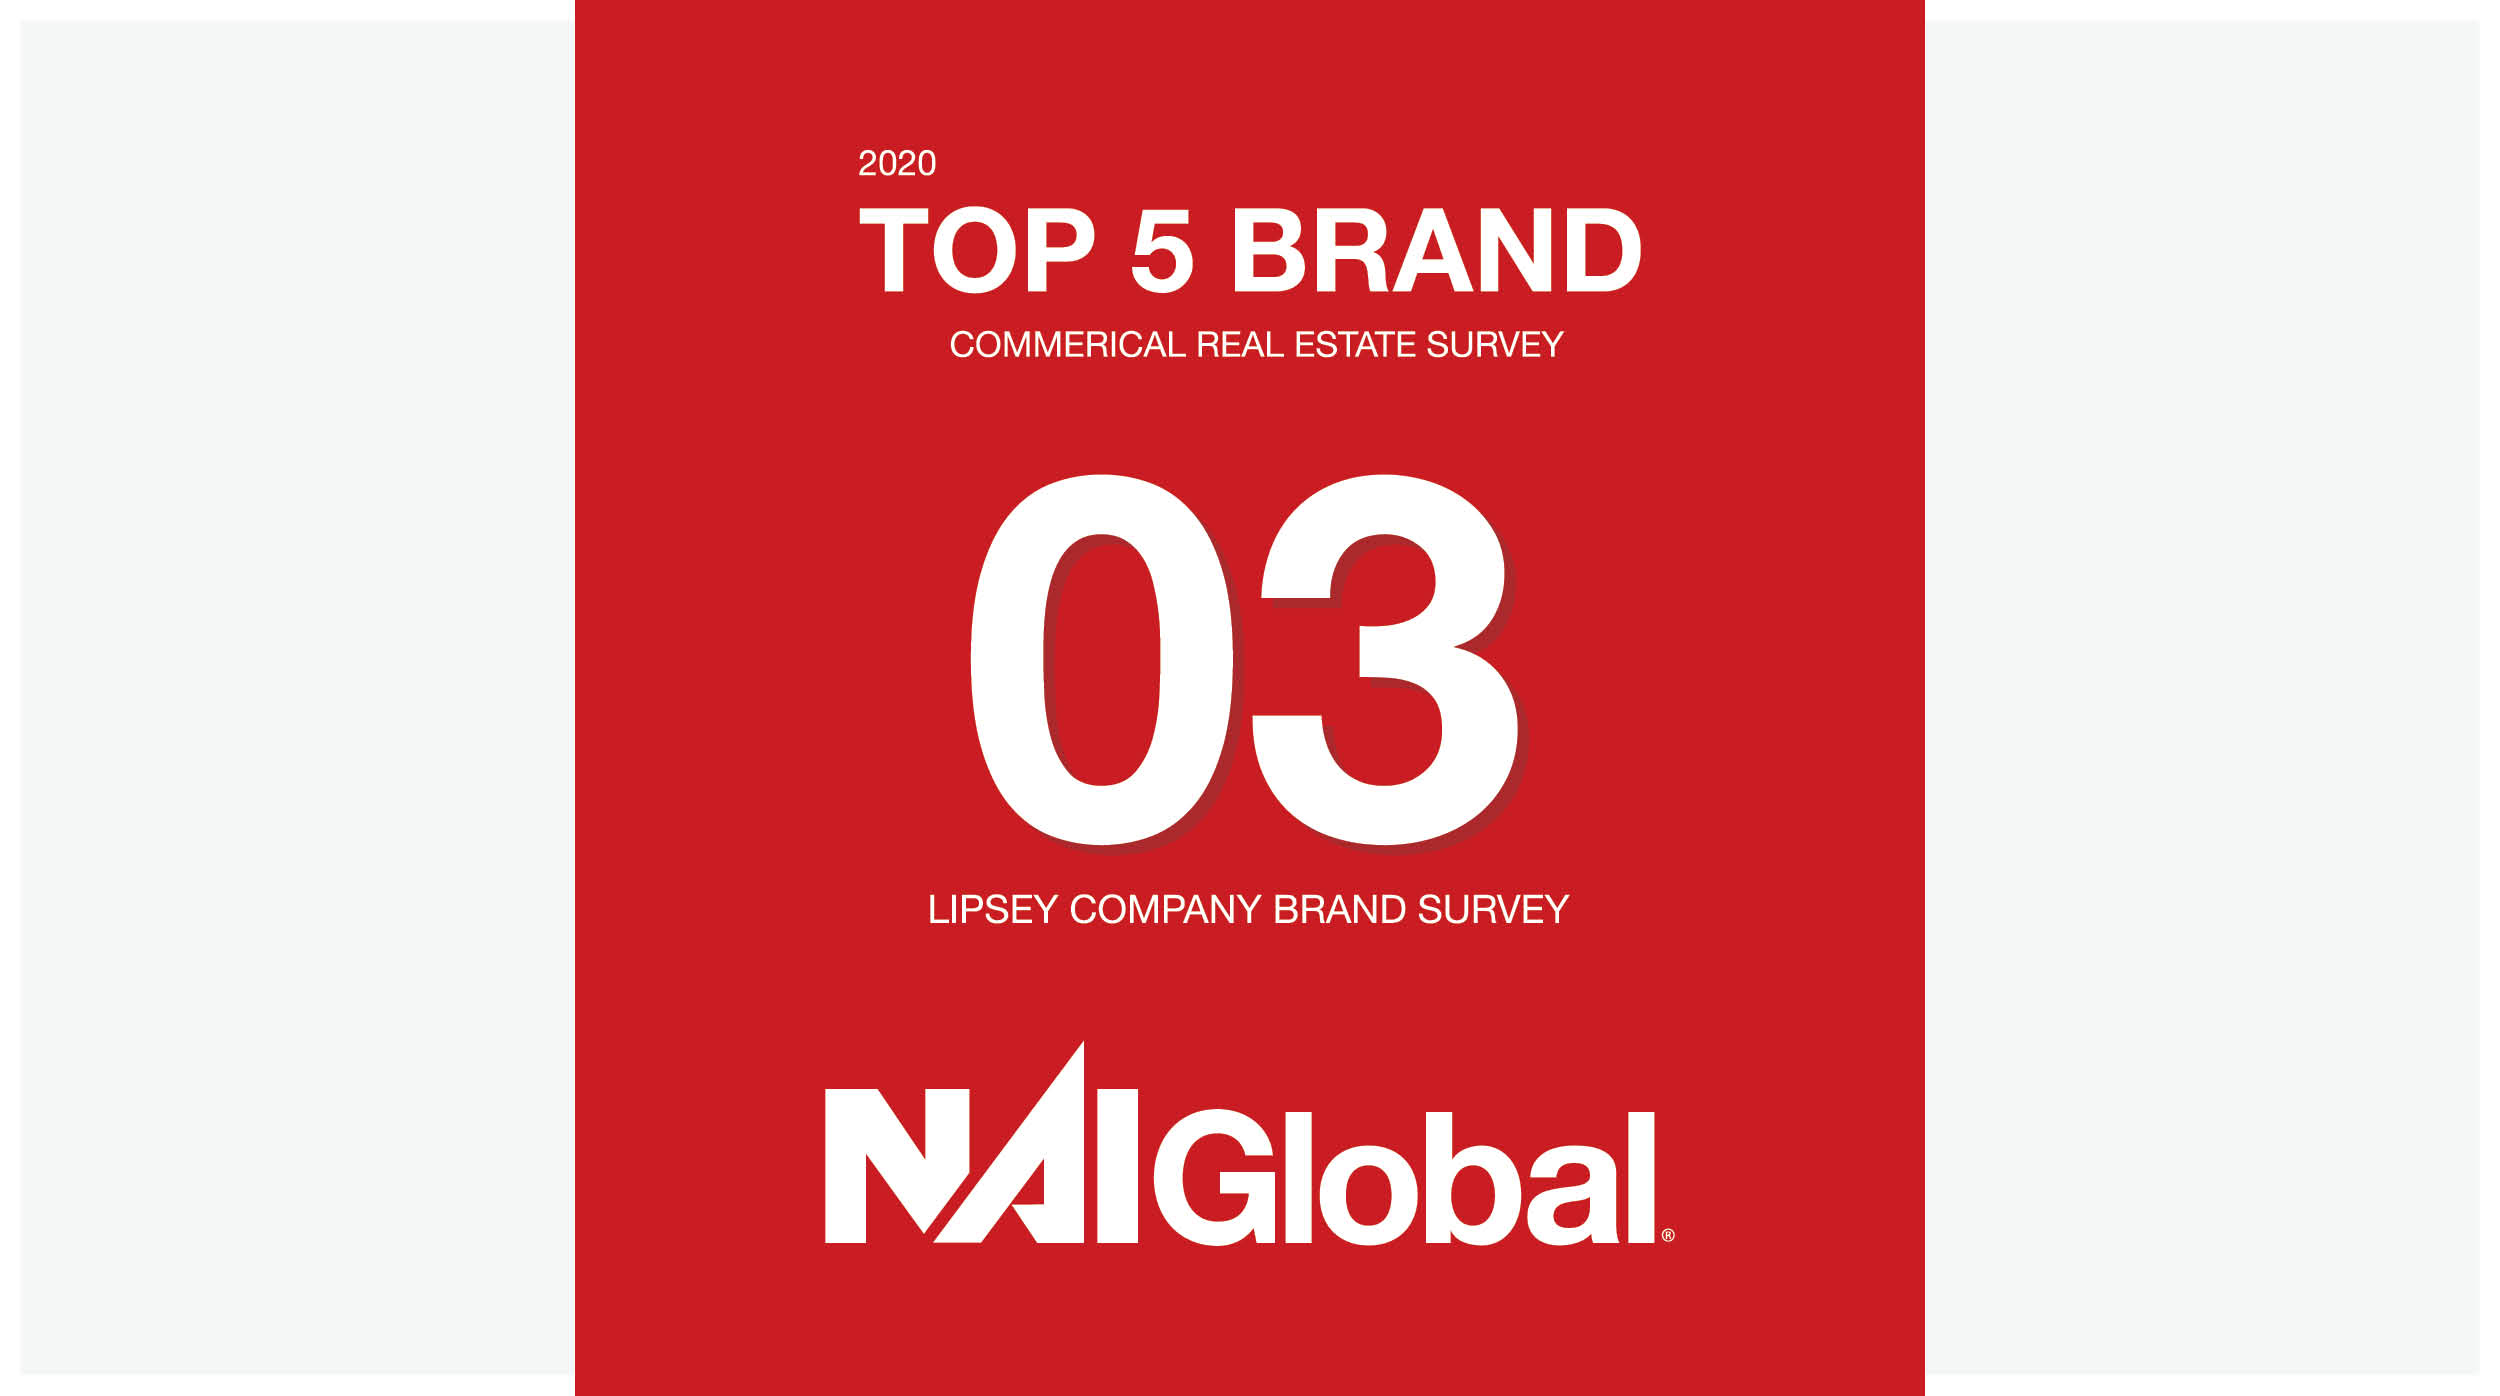 NAI Global Ranked 3rd in the Lipsey Brand Survey